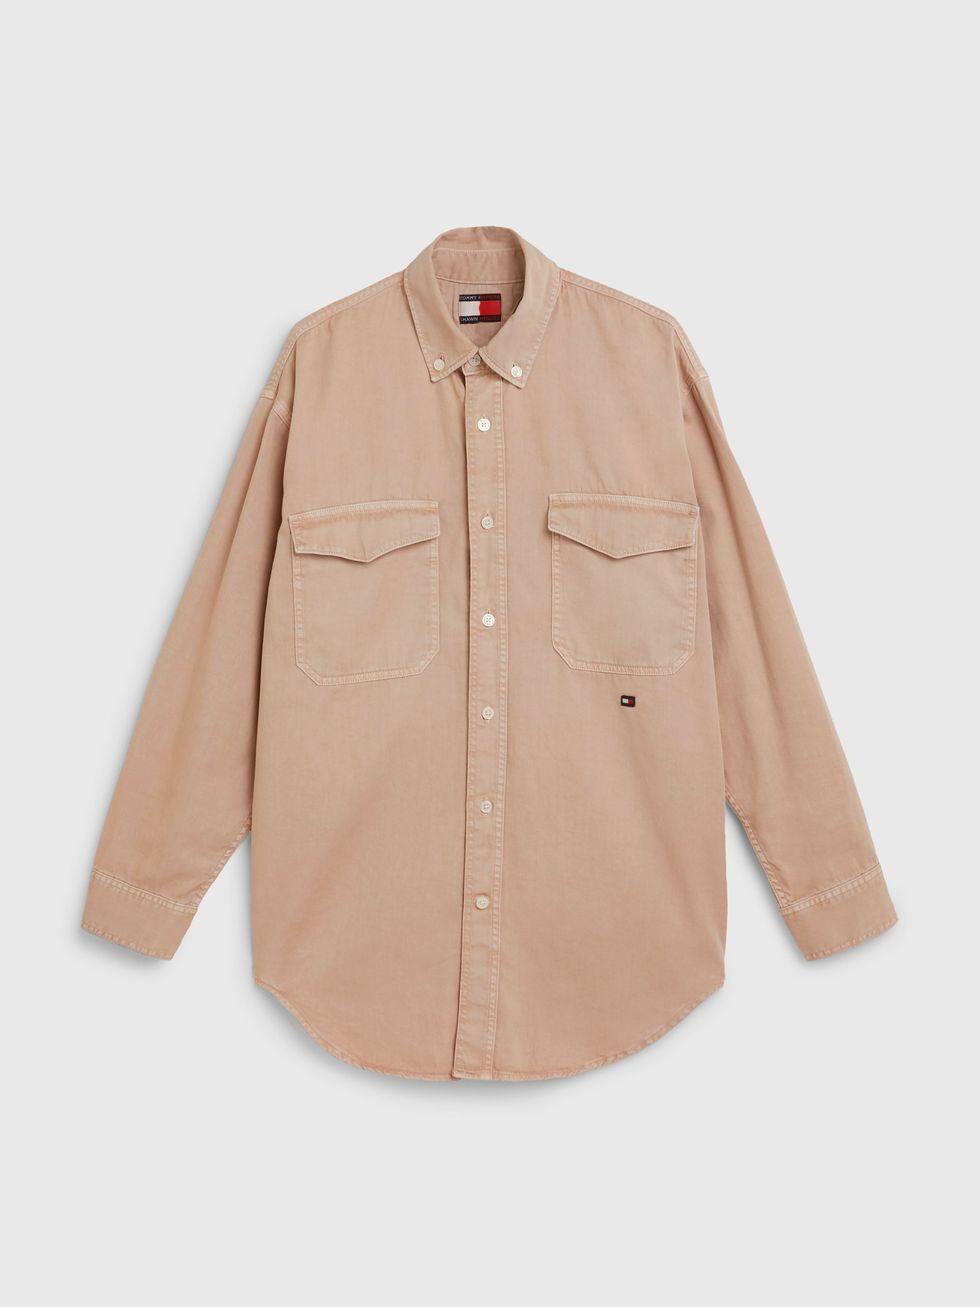 Tommy Hilfiger x Shawn Mendes Overshirt